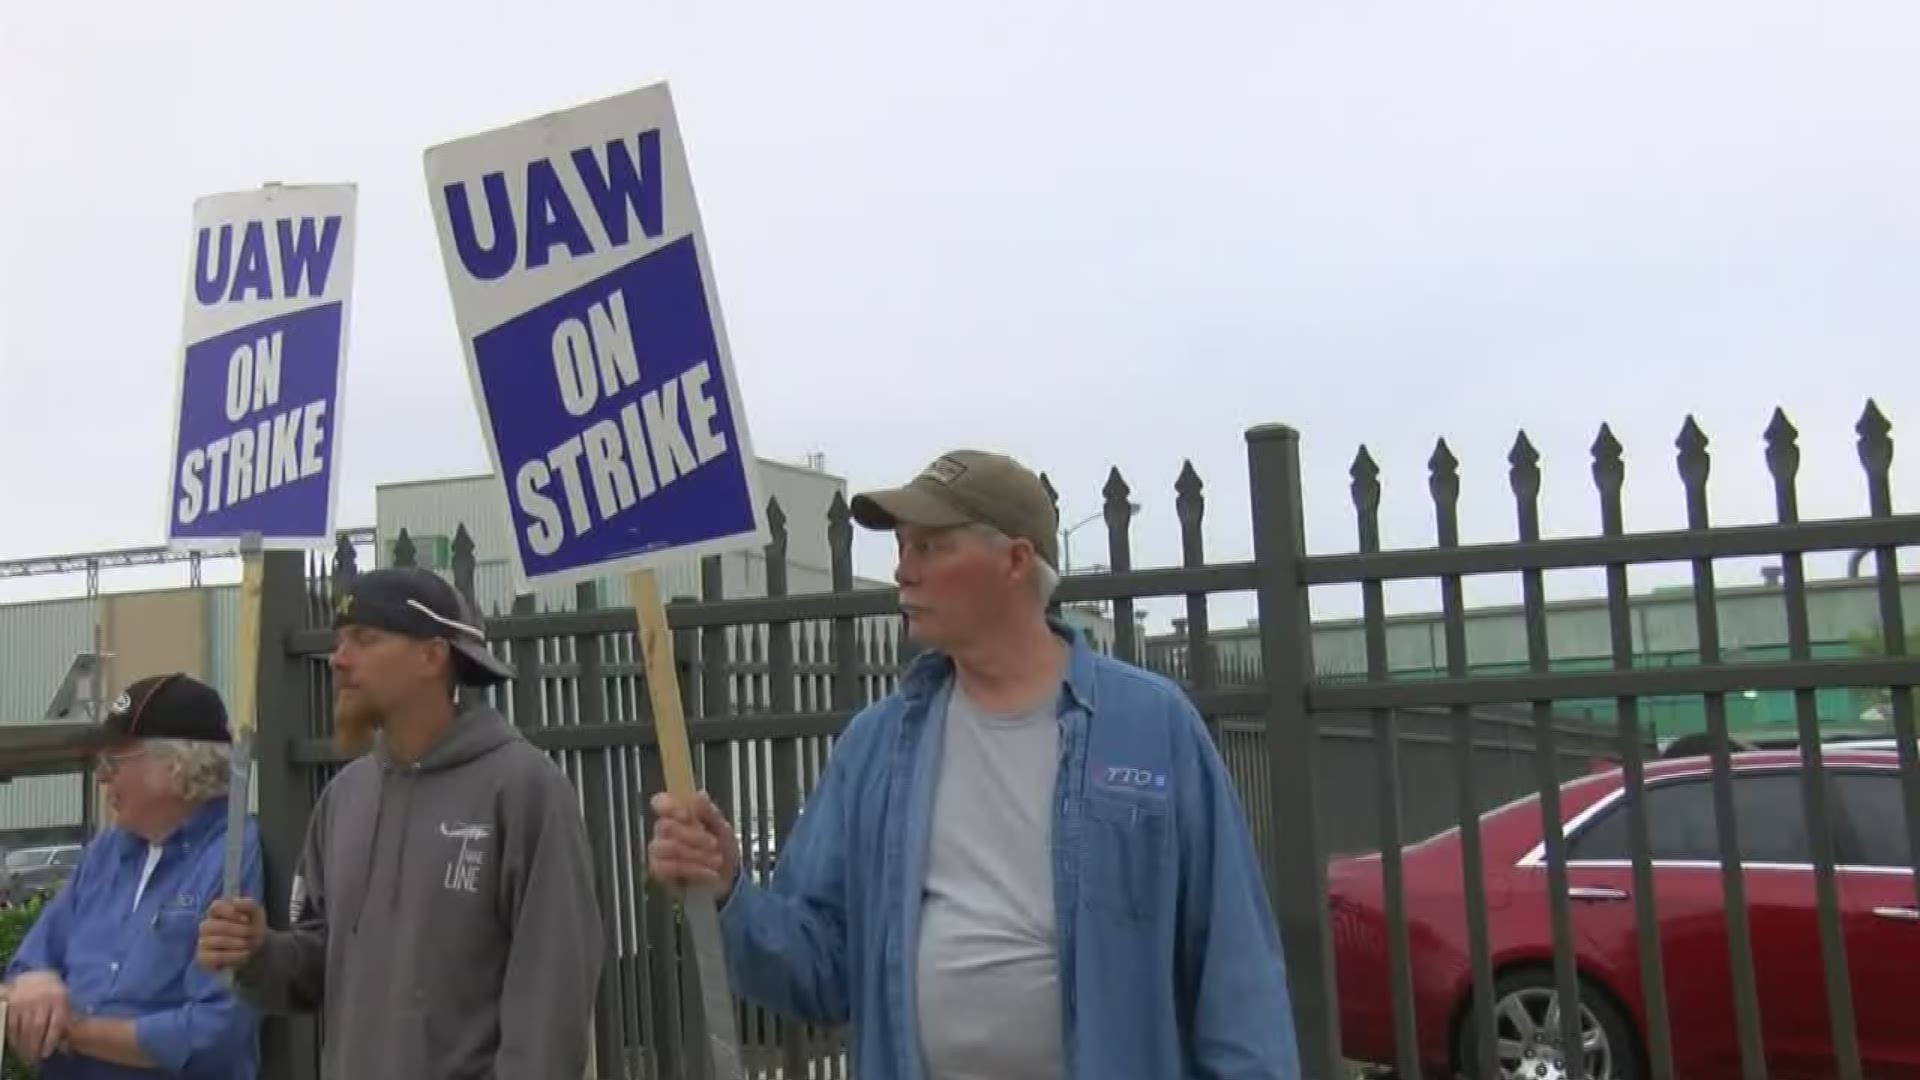 Thursday marks day four of UAW members of GM being off the assembly line and on the picket line. Now, Jeep workers also join them on the line in a show of solidarity